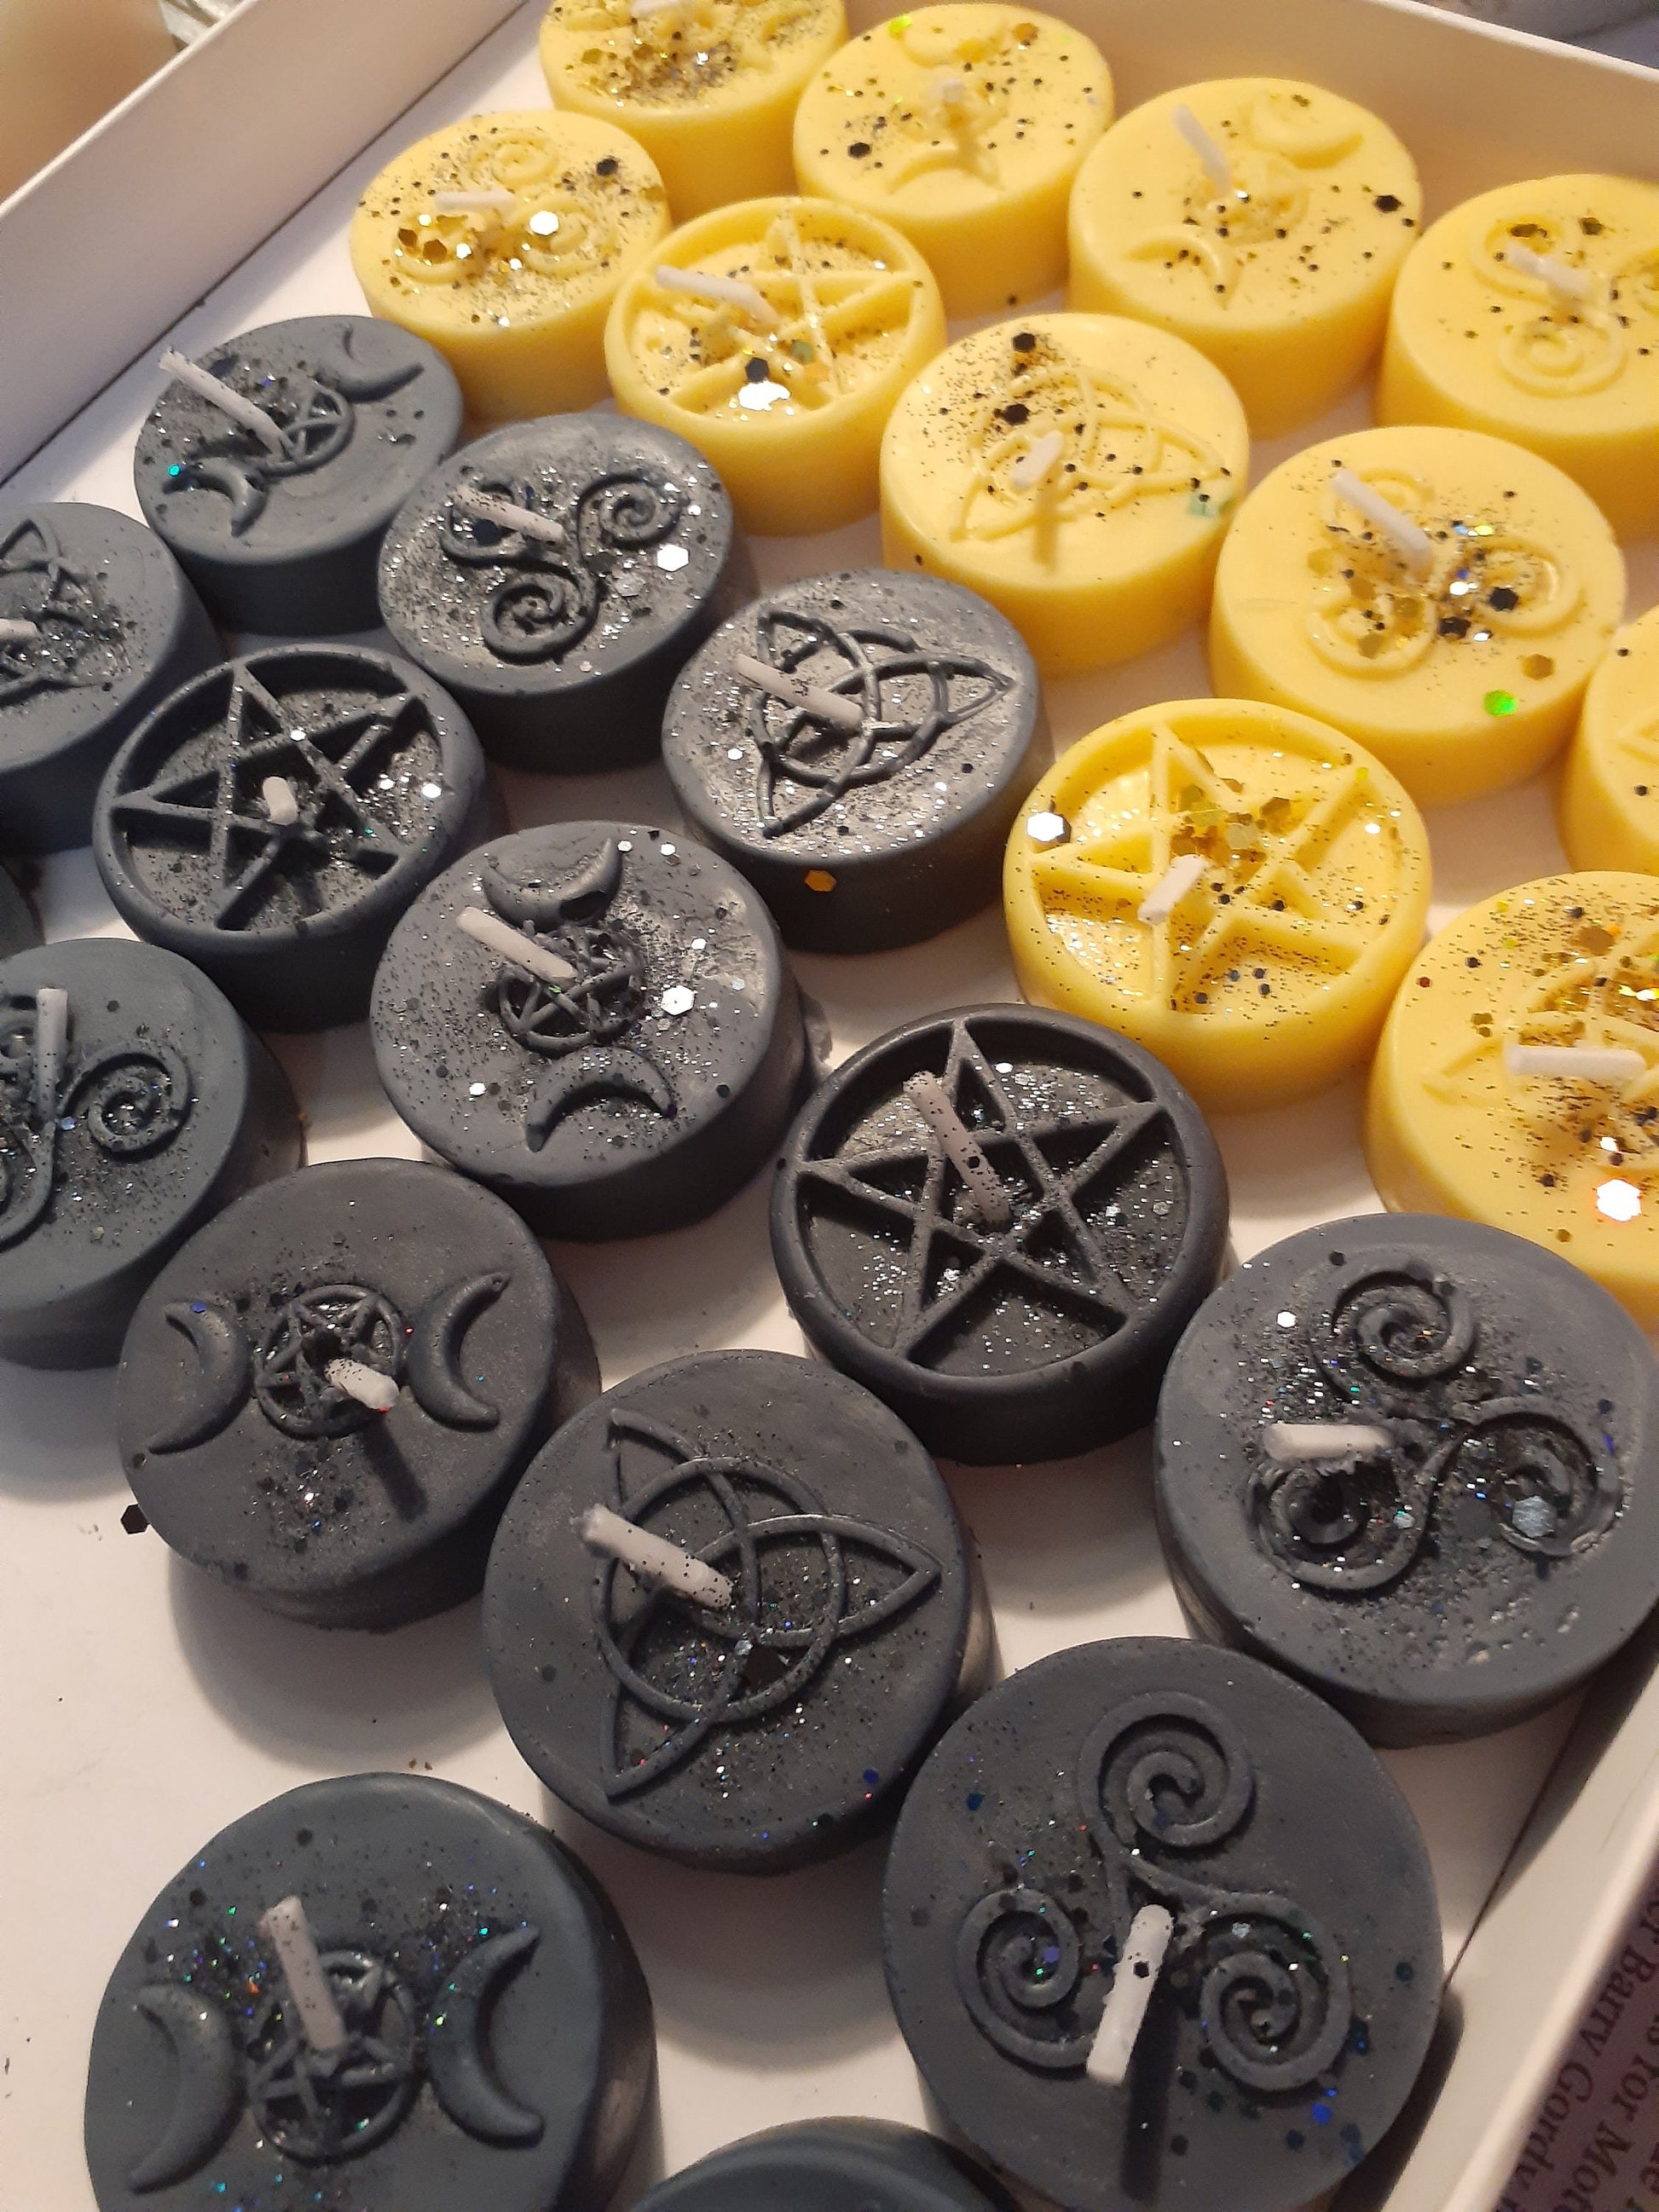 Pagan Symbols Tealight Candles For Your Choice of Deity - Pentacle, Triple Moon- Candle for Pagan Wicca Wicca Voodoo Rituals and Altars